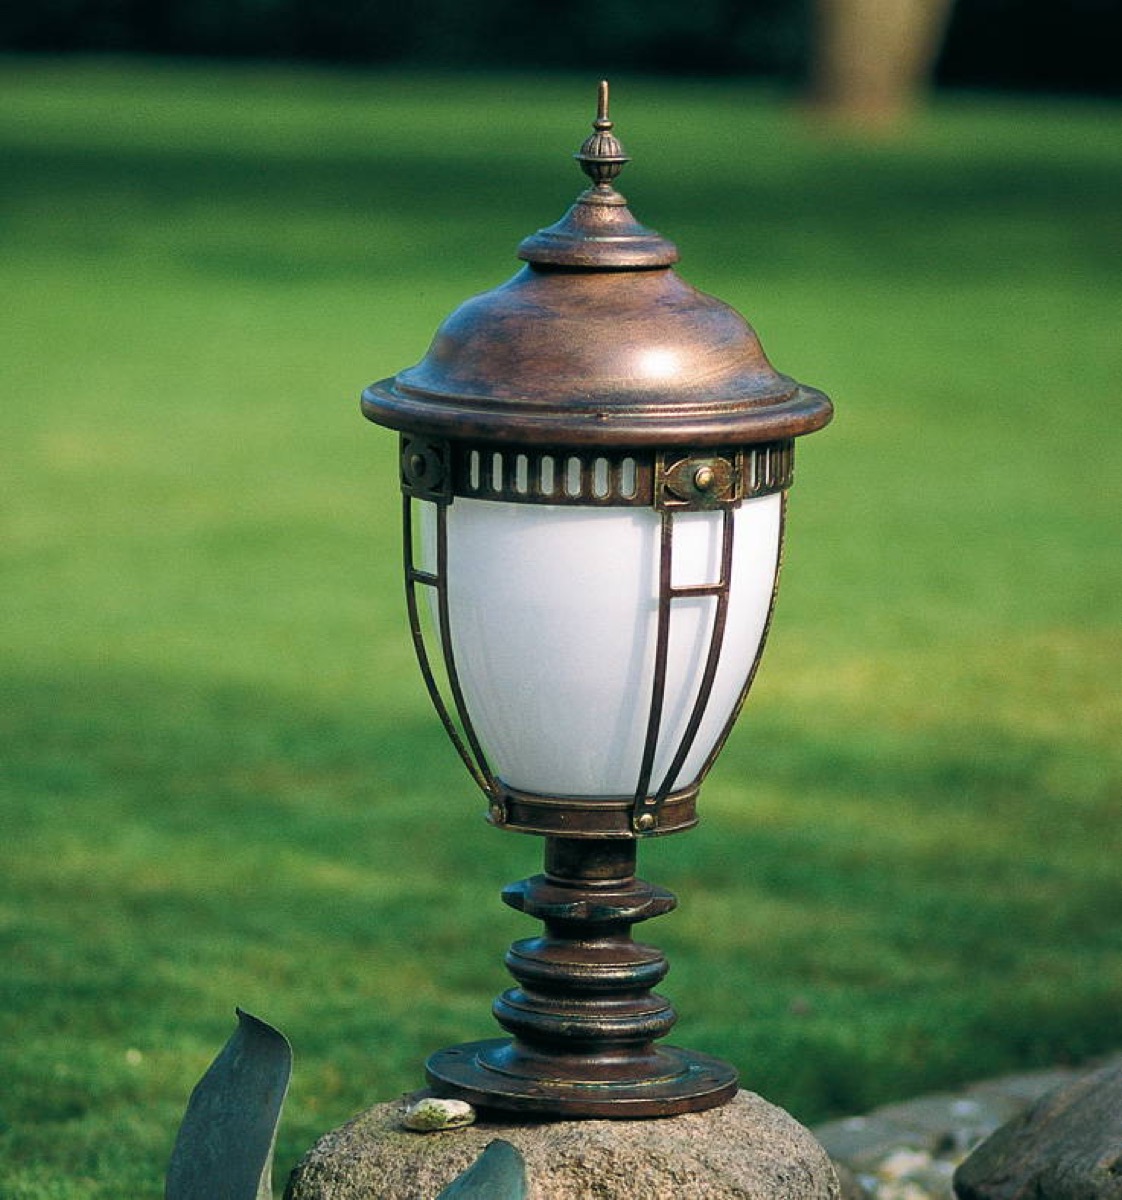 With pole lights and candelabras - stylishly illuminate paths, house entrances and front gardens.